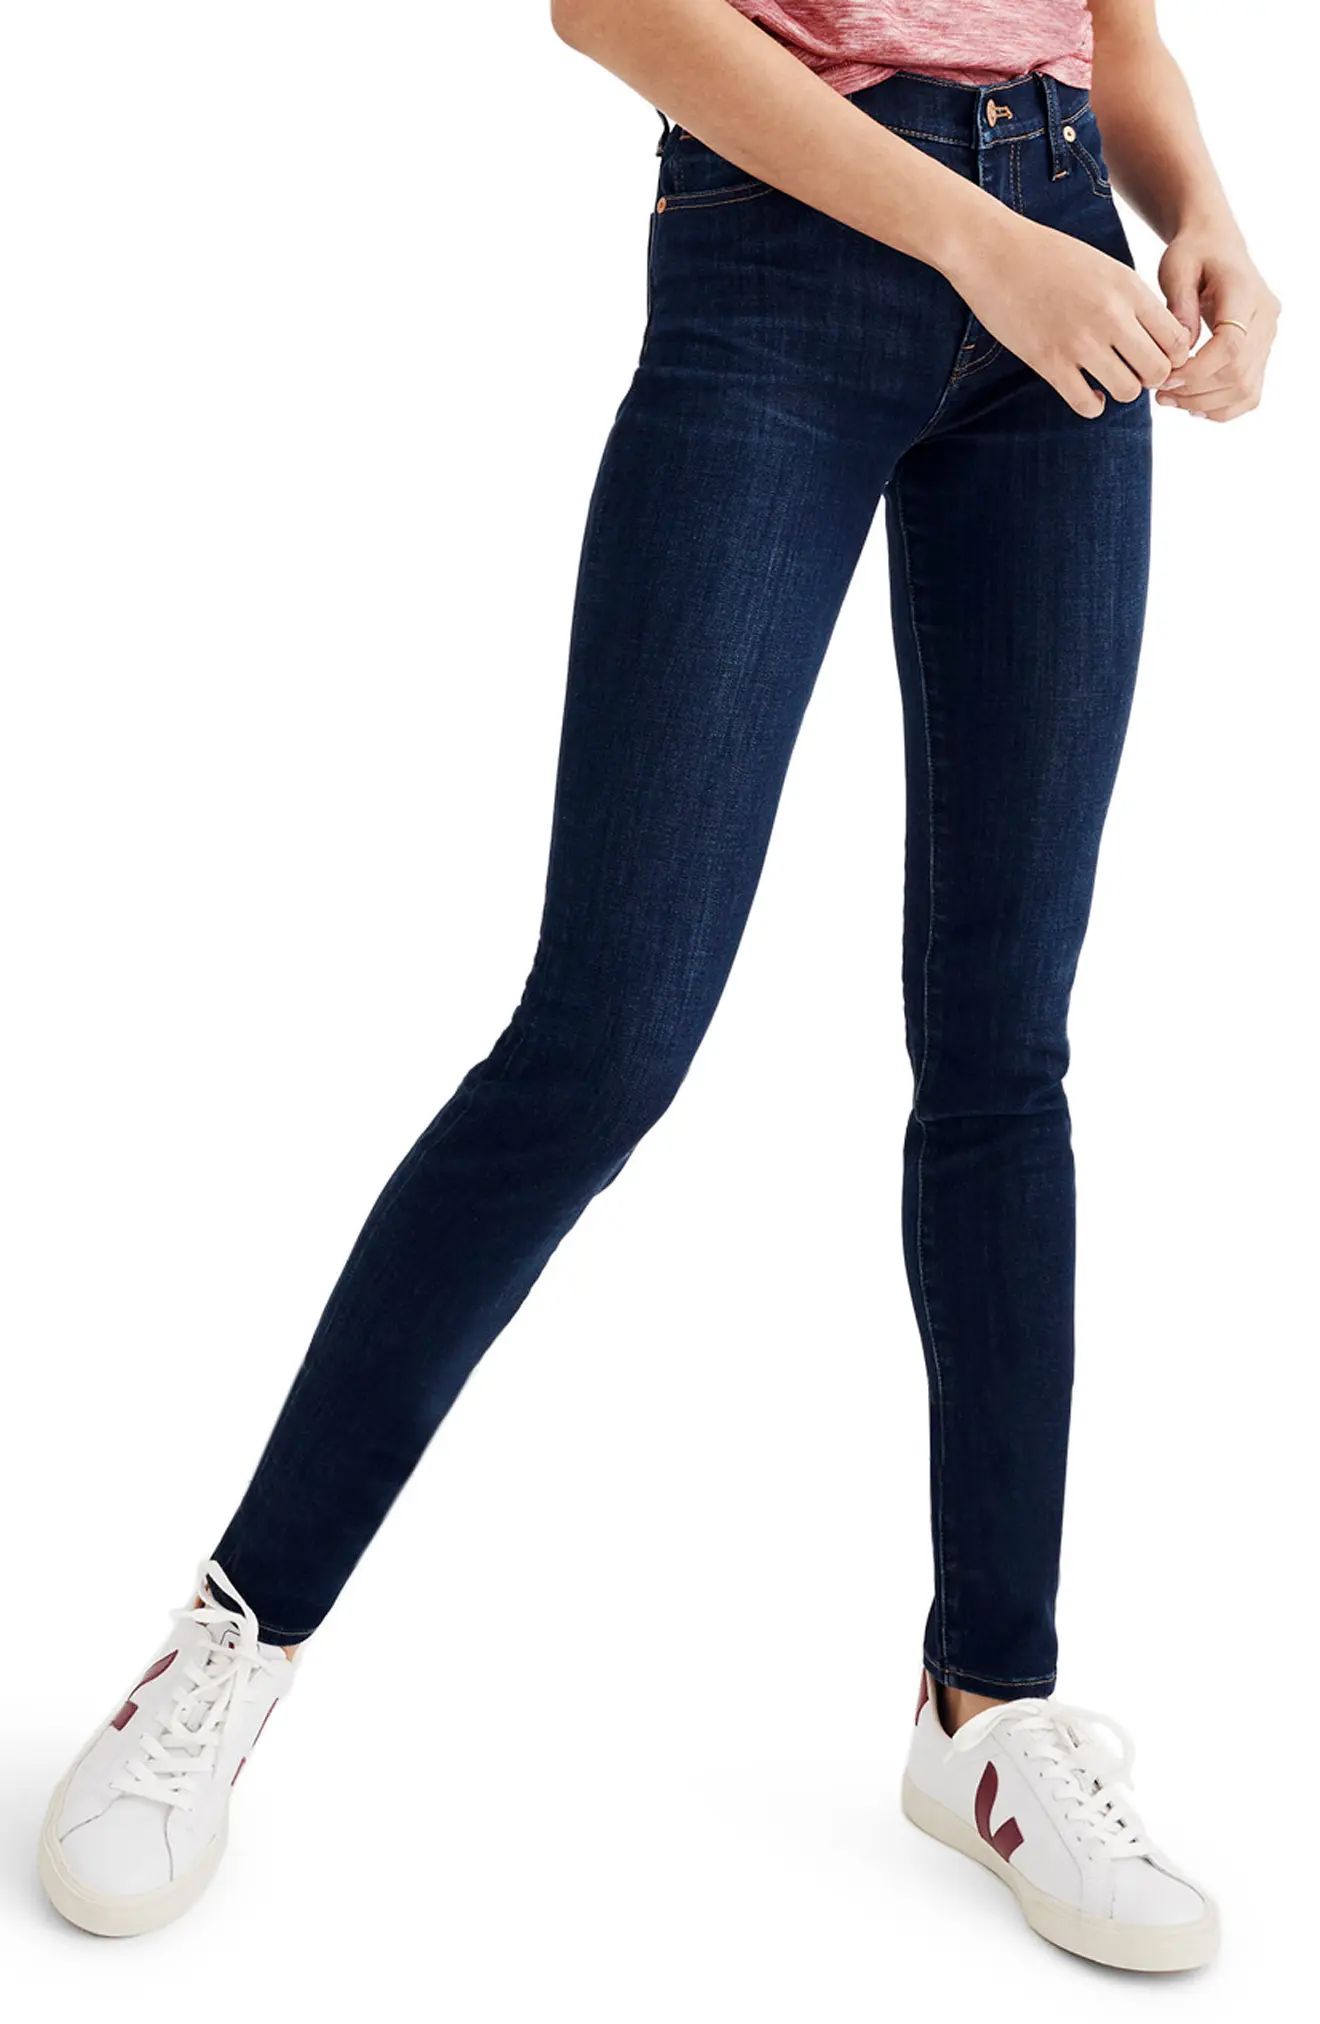 Women's Madewell 9-Inch High Rise Skinny Jeans, Size 26 - Blue | Nordstrom